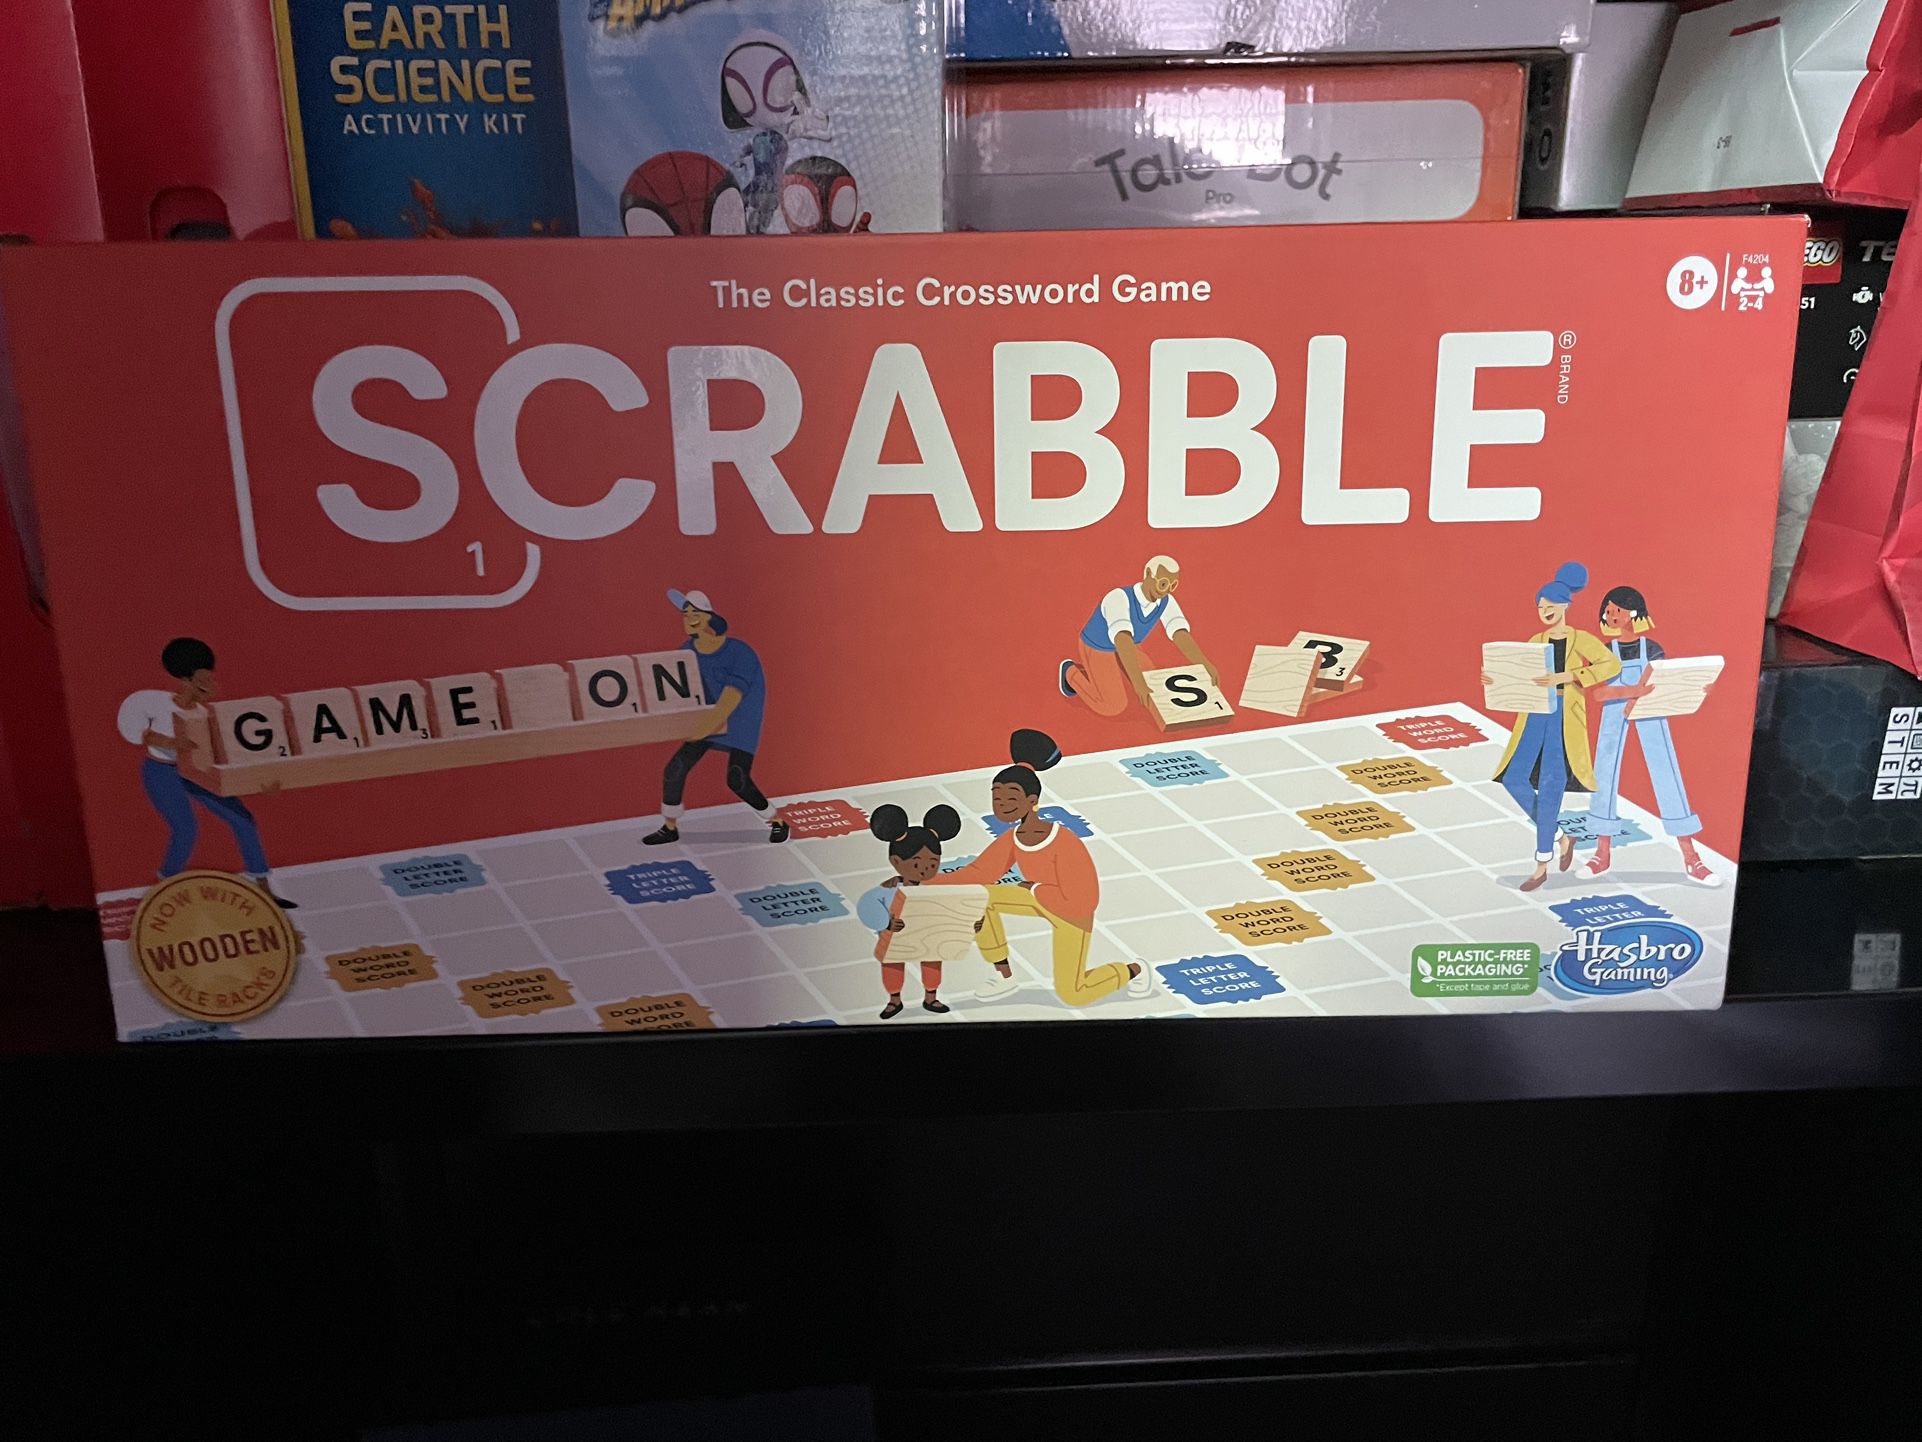 Brand New Hasbro Gaming Scrabble Board Game,Word Game for Kids 